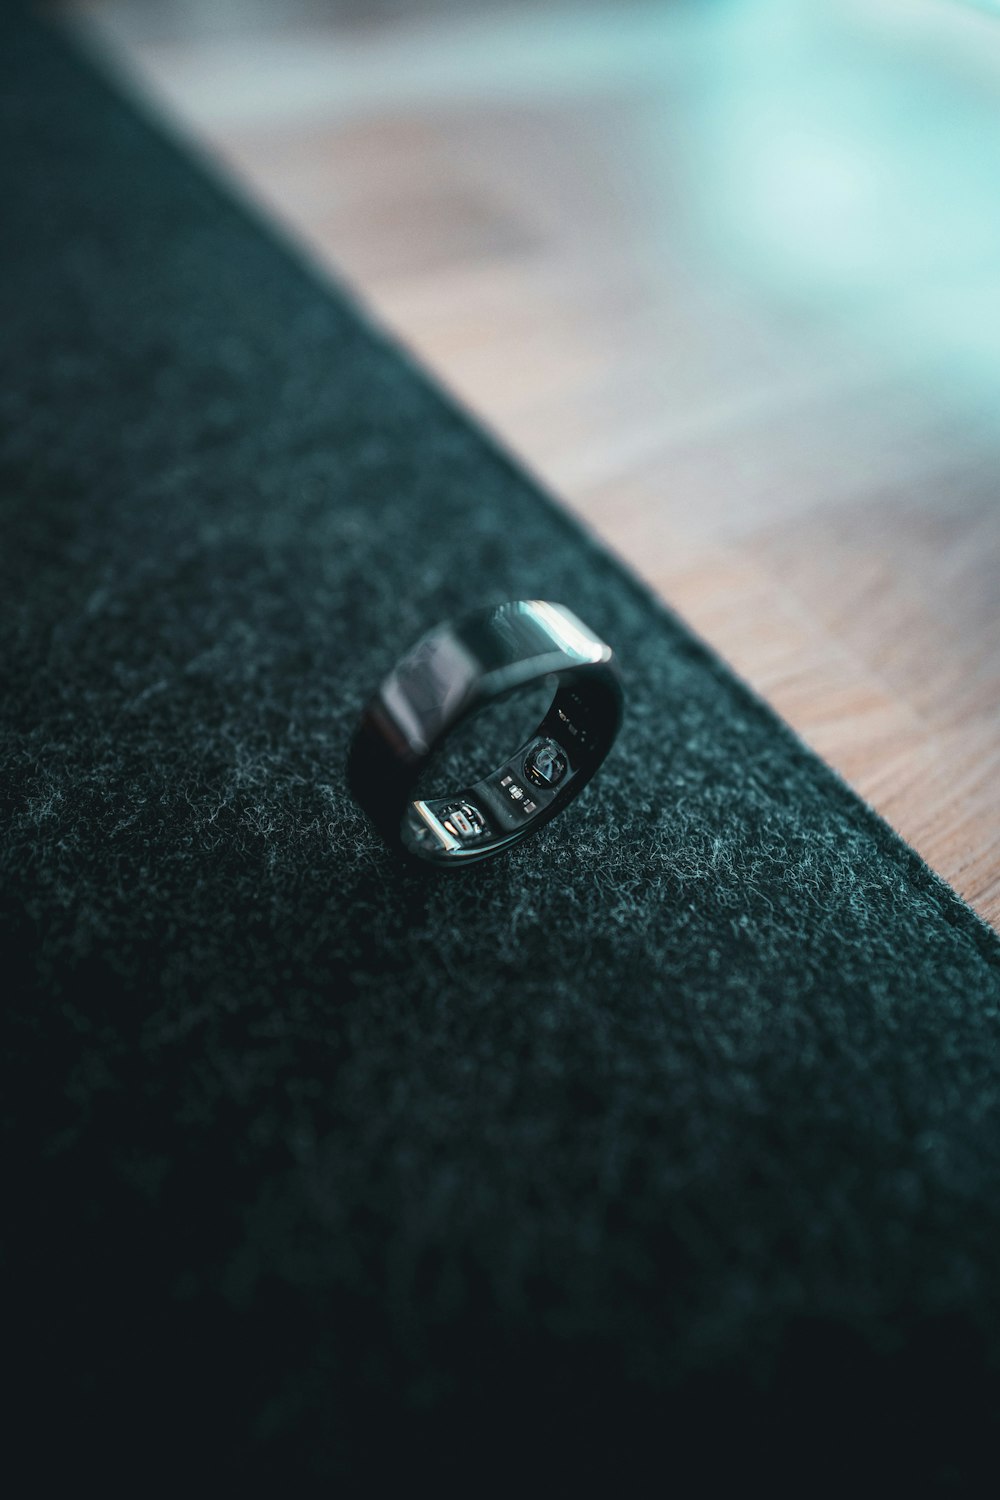 a close up of a ring